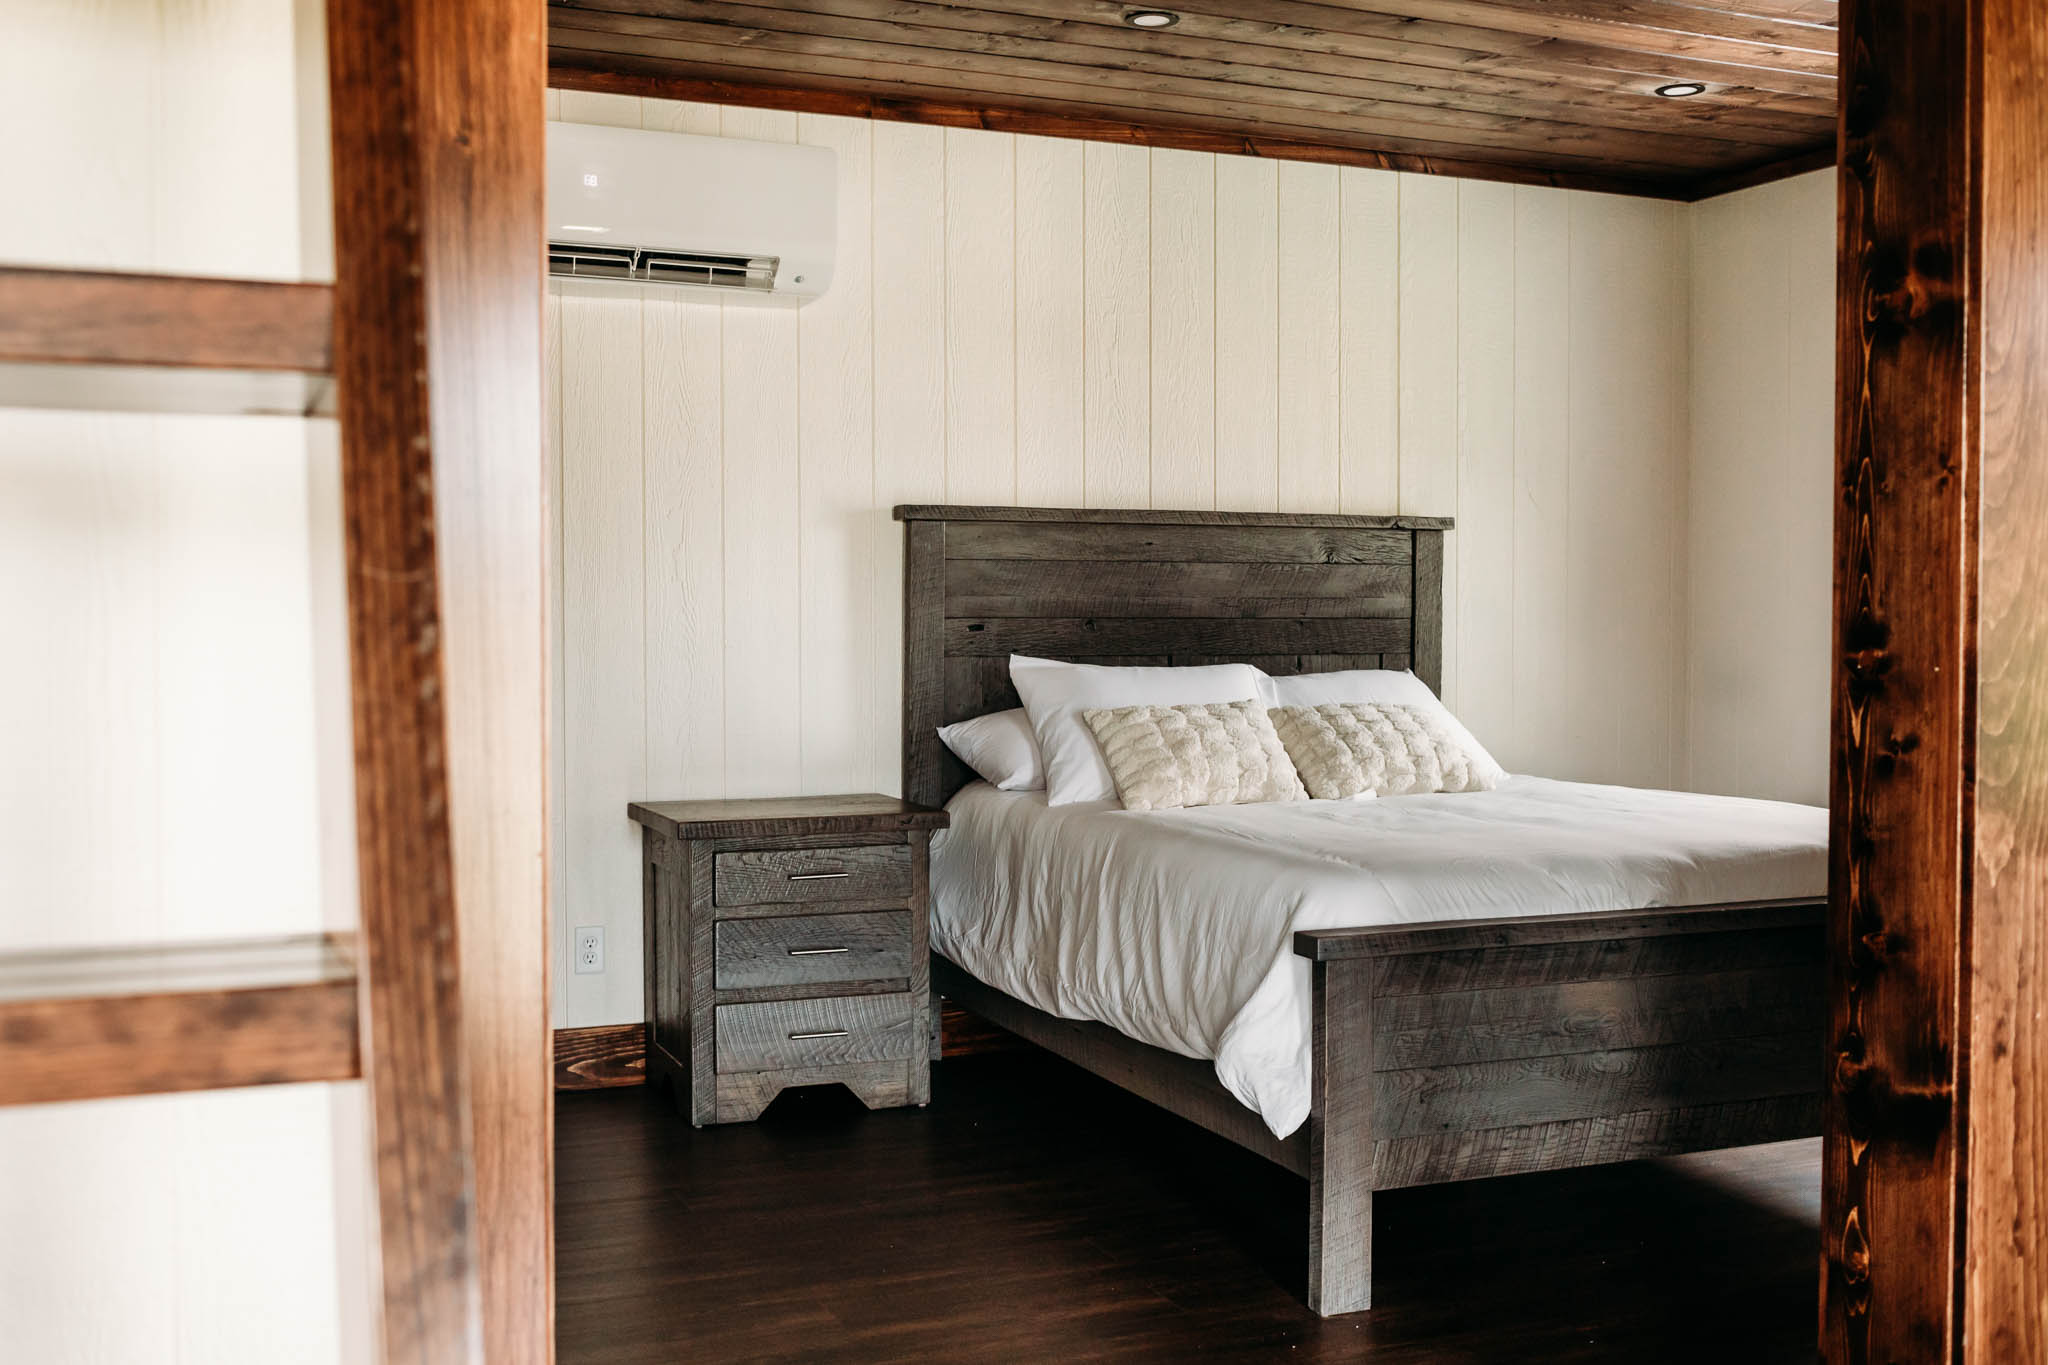 A view of the bedroom in the Villas at The VeNue. There is a wooden queen bed with white covers and a wooden nightstand